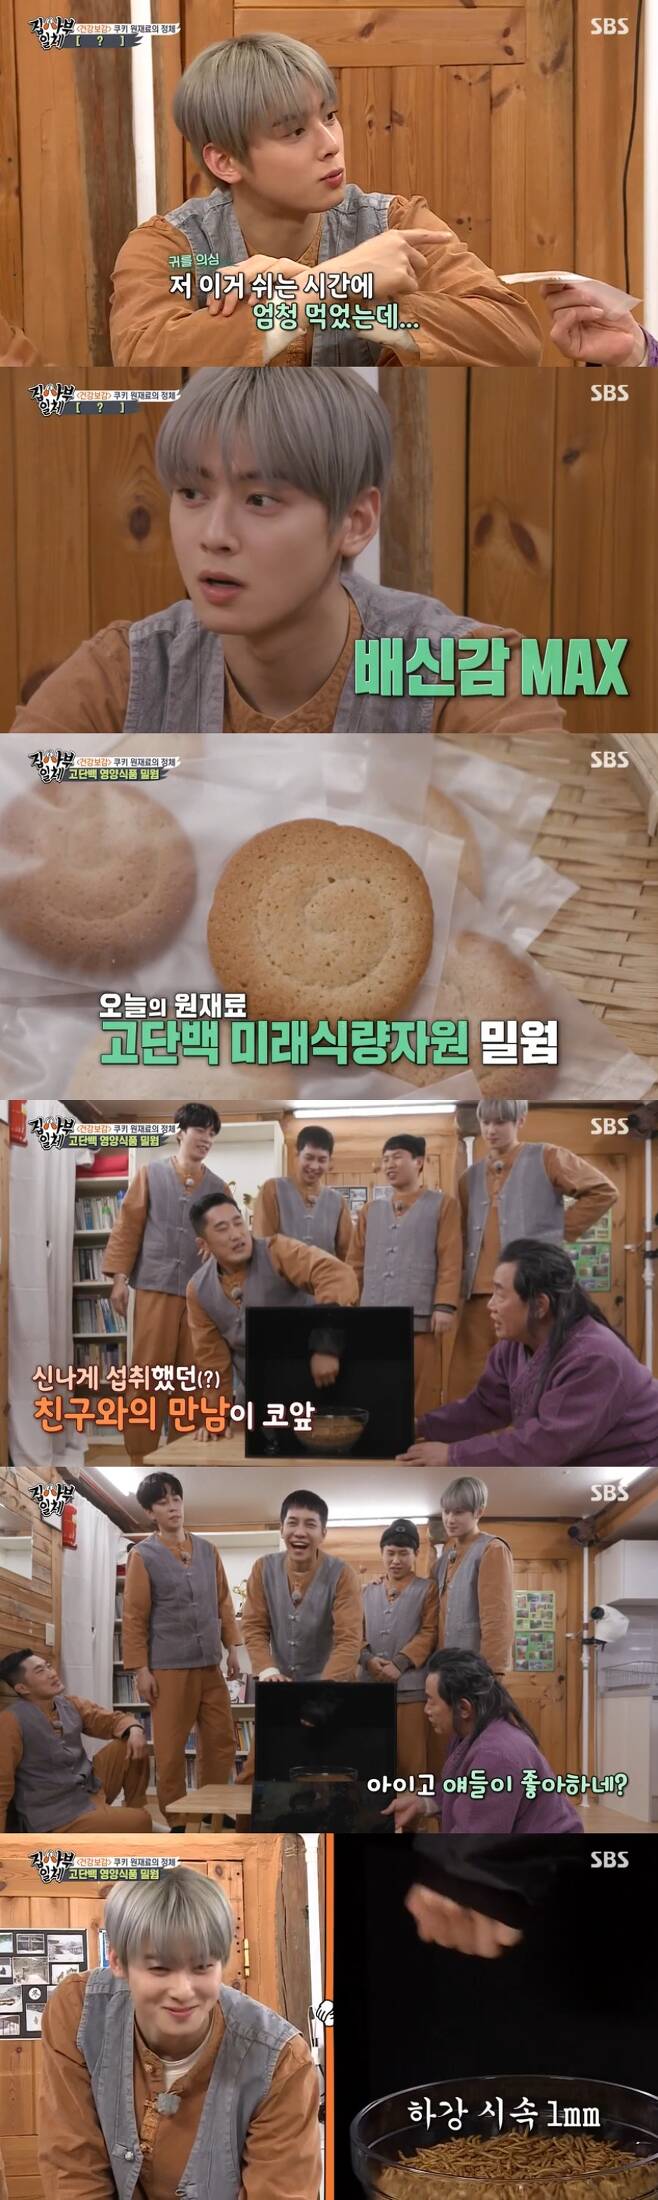 Seoul=) = Cha Eun-woo was impacted when he saw the wheatworm.On SBS All The Butlers broadcasted on the afternoon of the 11th, entertainment loan Lee Kyung-kyu appeared as master.Lee Kyung-kyu gave a special Cookie to the members under the name of Healthy Boss, and after seeing the members eat, In fact, this Cookie is the best resting material, and when the raw material comes in, touch it with your hand and hit Identity.Cha Eun-woo said, I kept eating this during the break, I ate about seven.The members were then frightened by touching Identity in the box, which was a wheat worm famous for its high protein nutrition.Kim Dong-Hyun saw it through the gap and was impacted and screamed, and Cha Eun-woo was not able to speak because he knew it was a wheat worm.Meanwhile, All The Butlers is broadcast every Sunday at 6:25 pm.